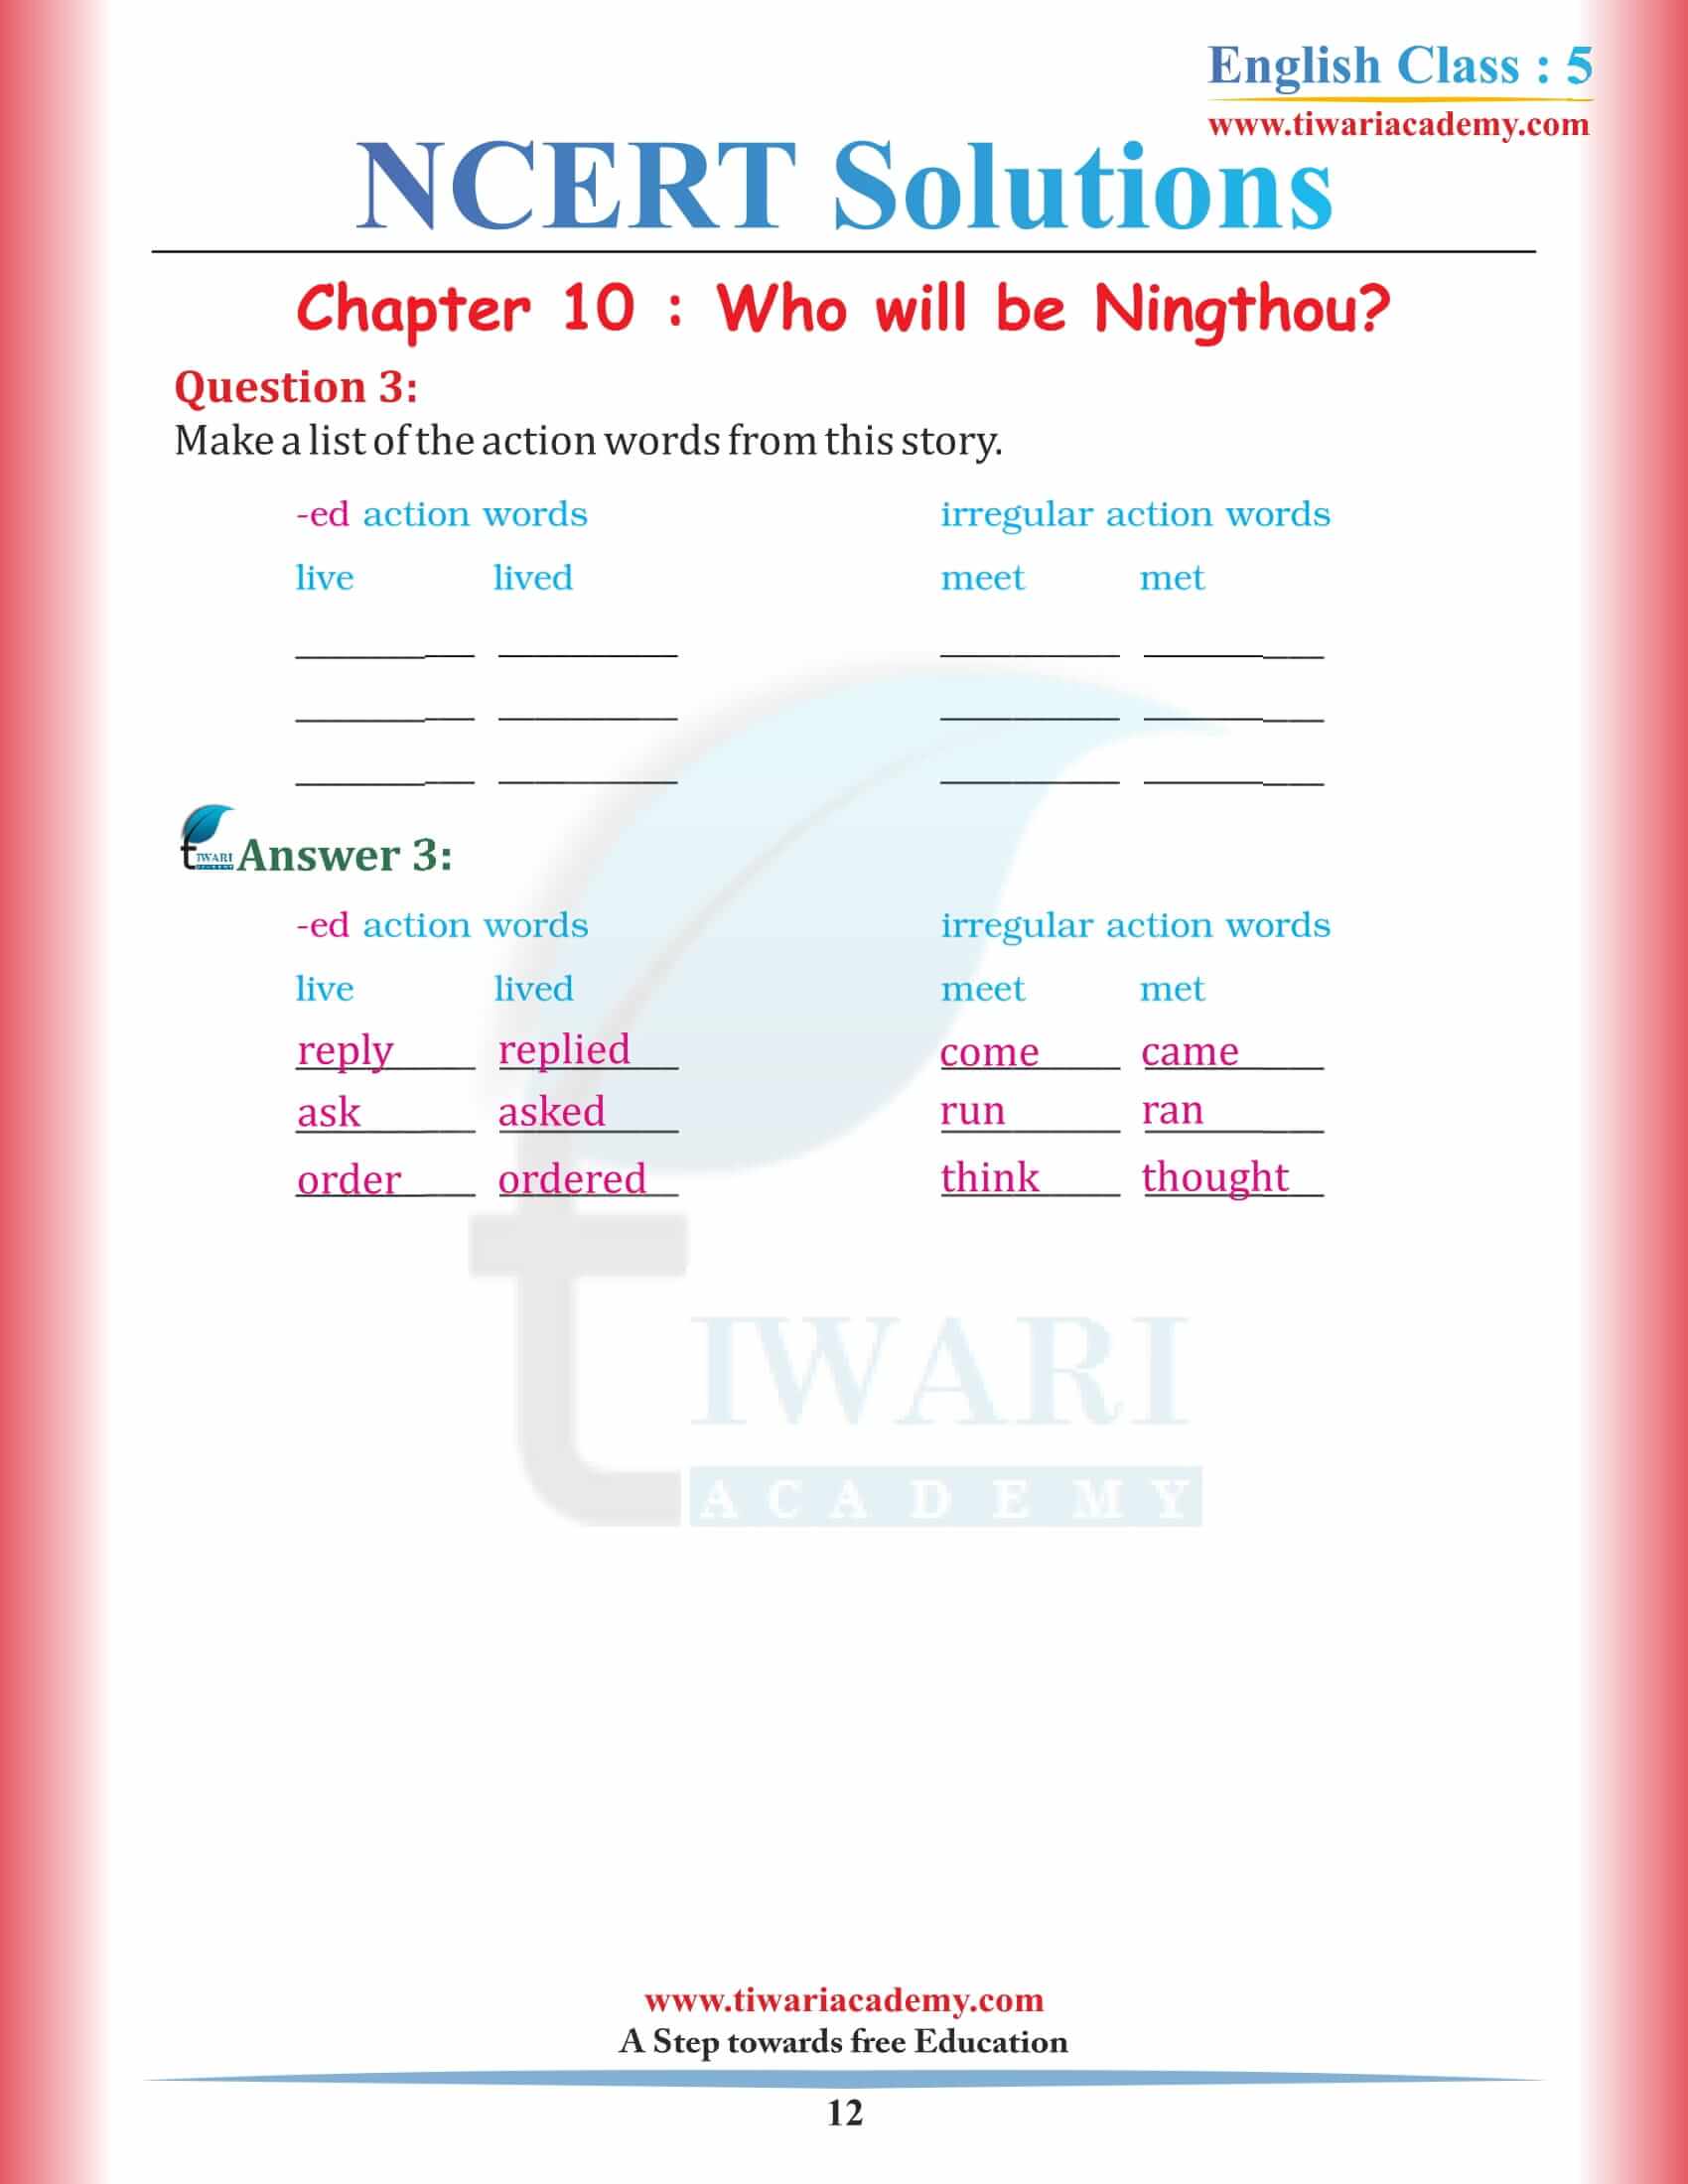 NCERT Solutions for Class 5 English Chapter 10 PDF free